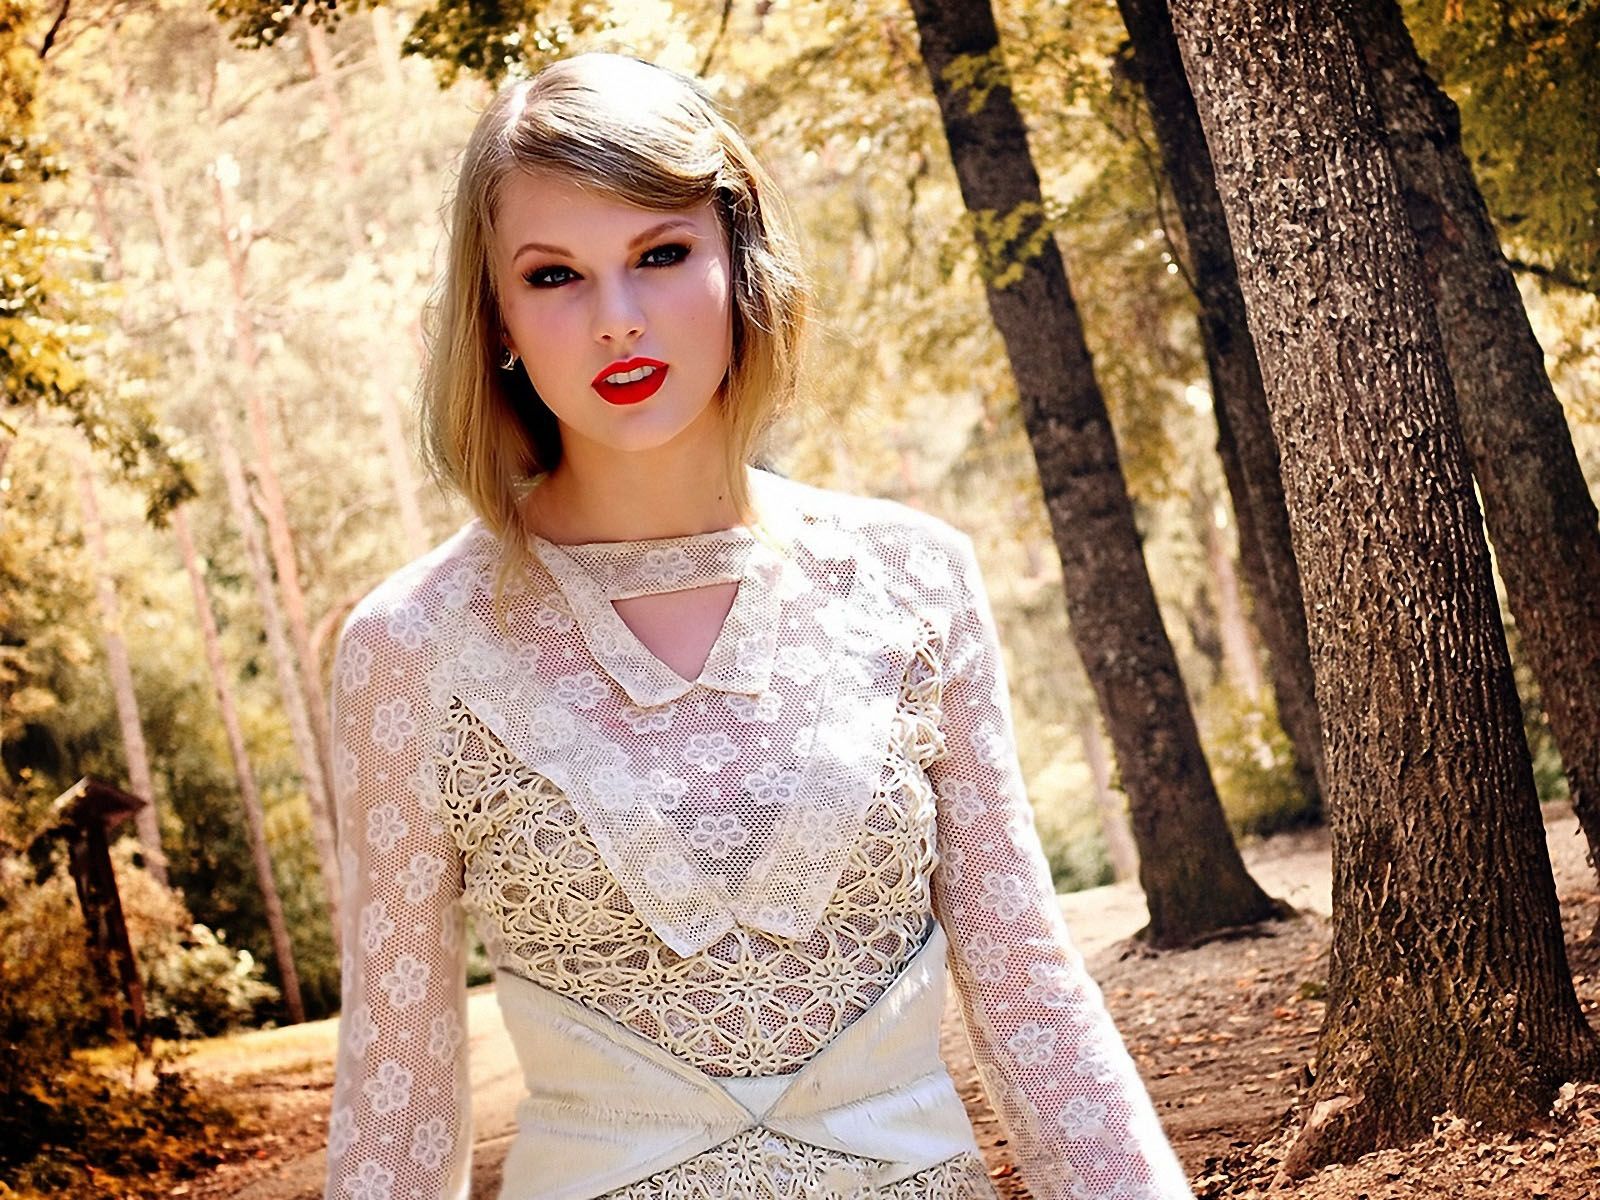 Taylor Swift Smiling 1600x1200 Wallpapers, 1600x1200 Wallpapers ...